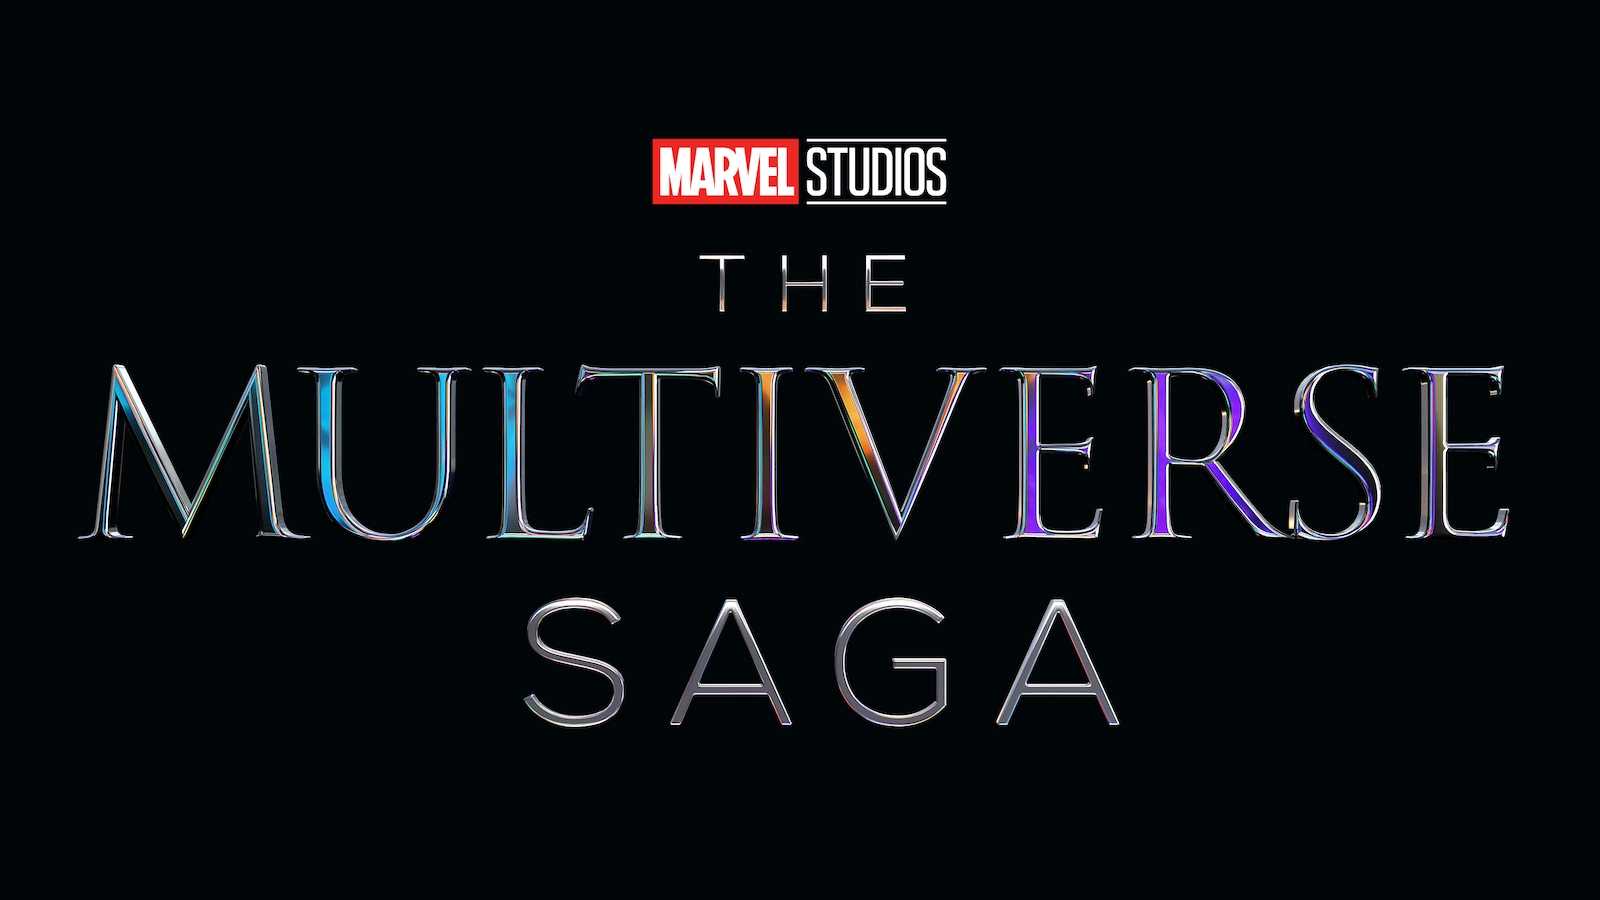 Marvel Studios announces Phase Five 'The Multiverse Saga' introduces the new cast and six upcoming movie releases